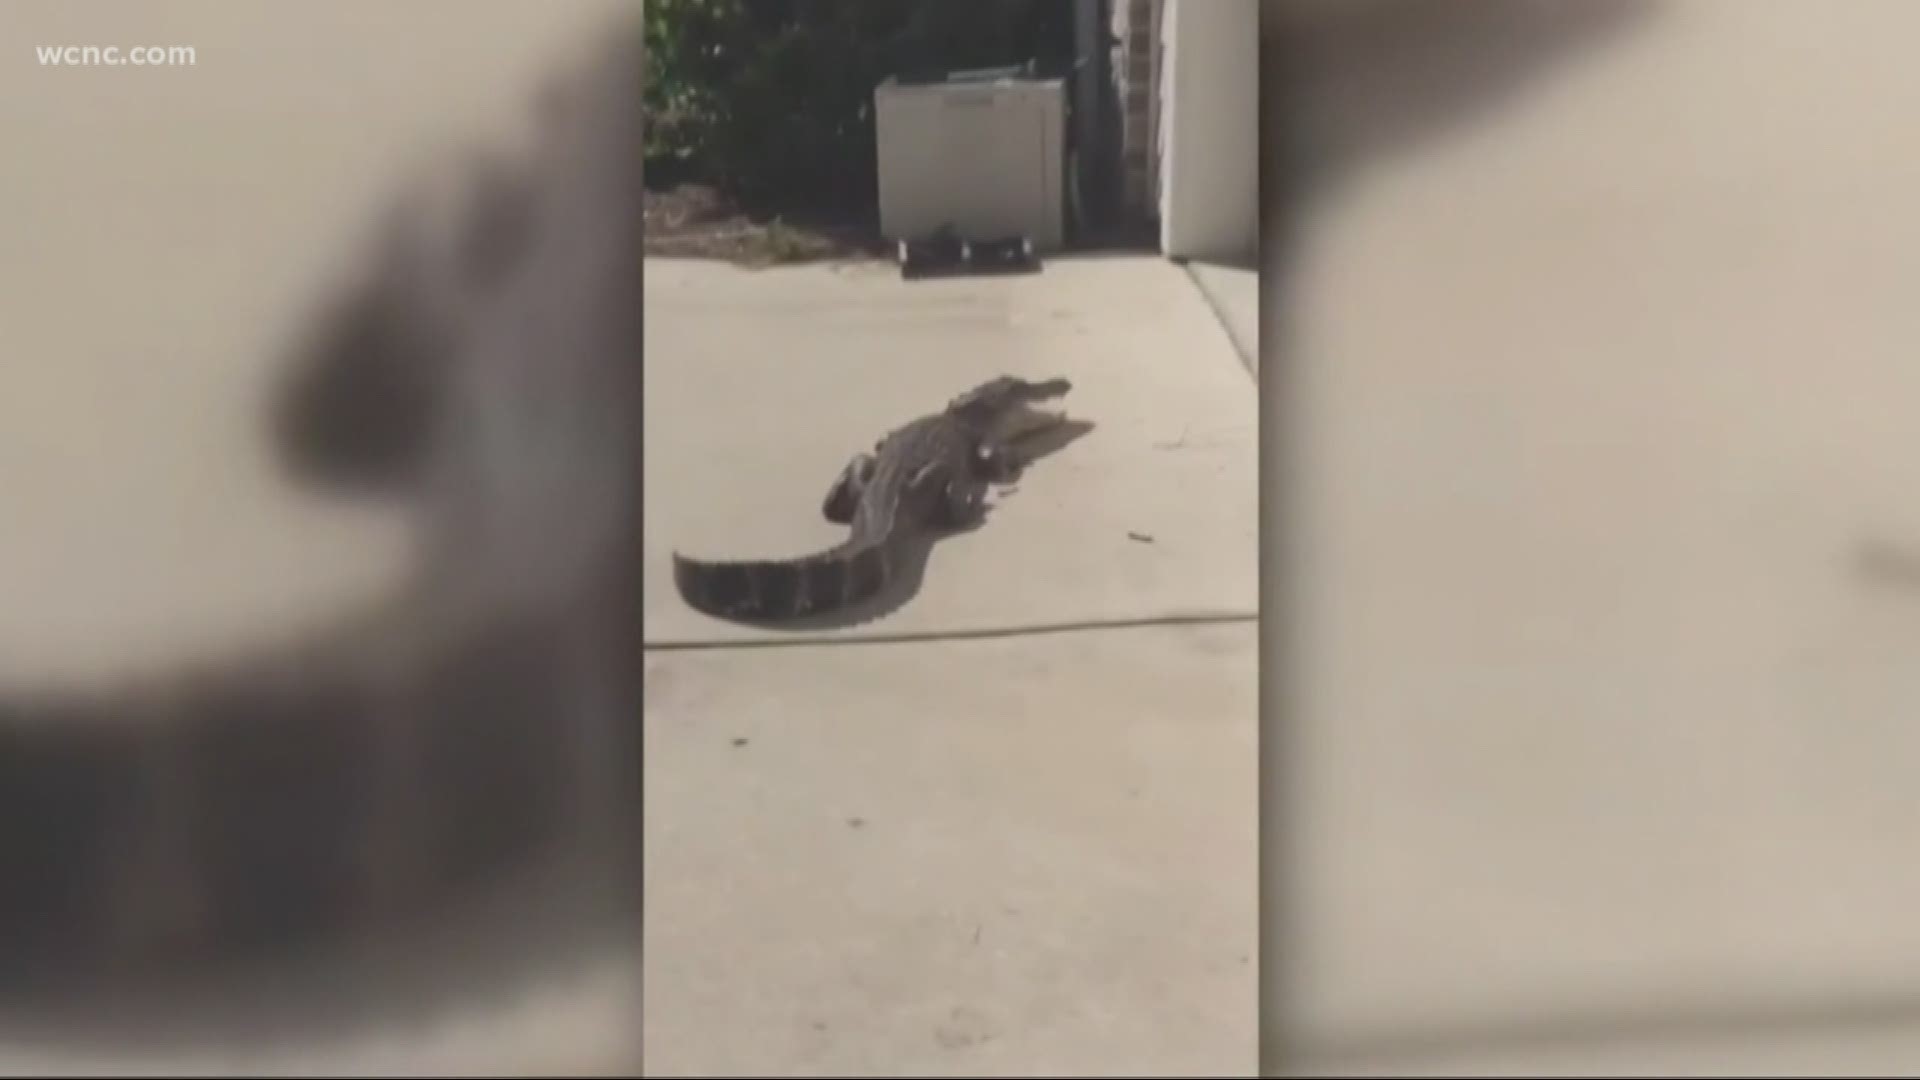 A South Carolina woman heard something knocking on her door. When she went outside to check on what she thought was an Amazon delivery, it turned out to be a huge alligator!